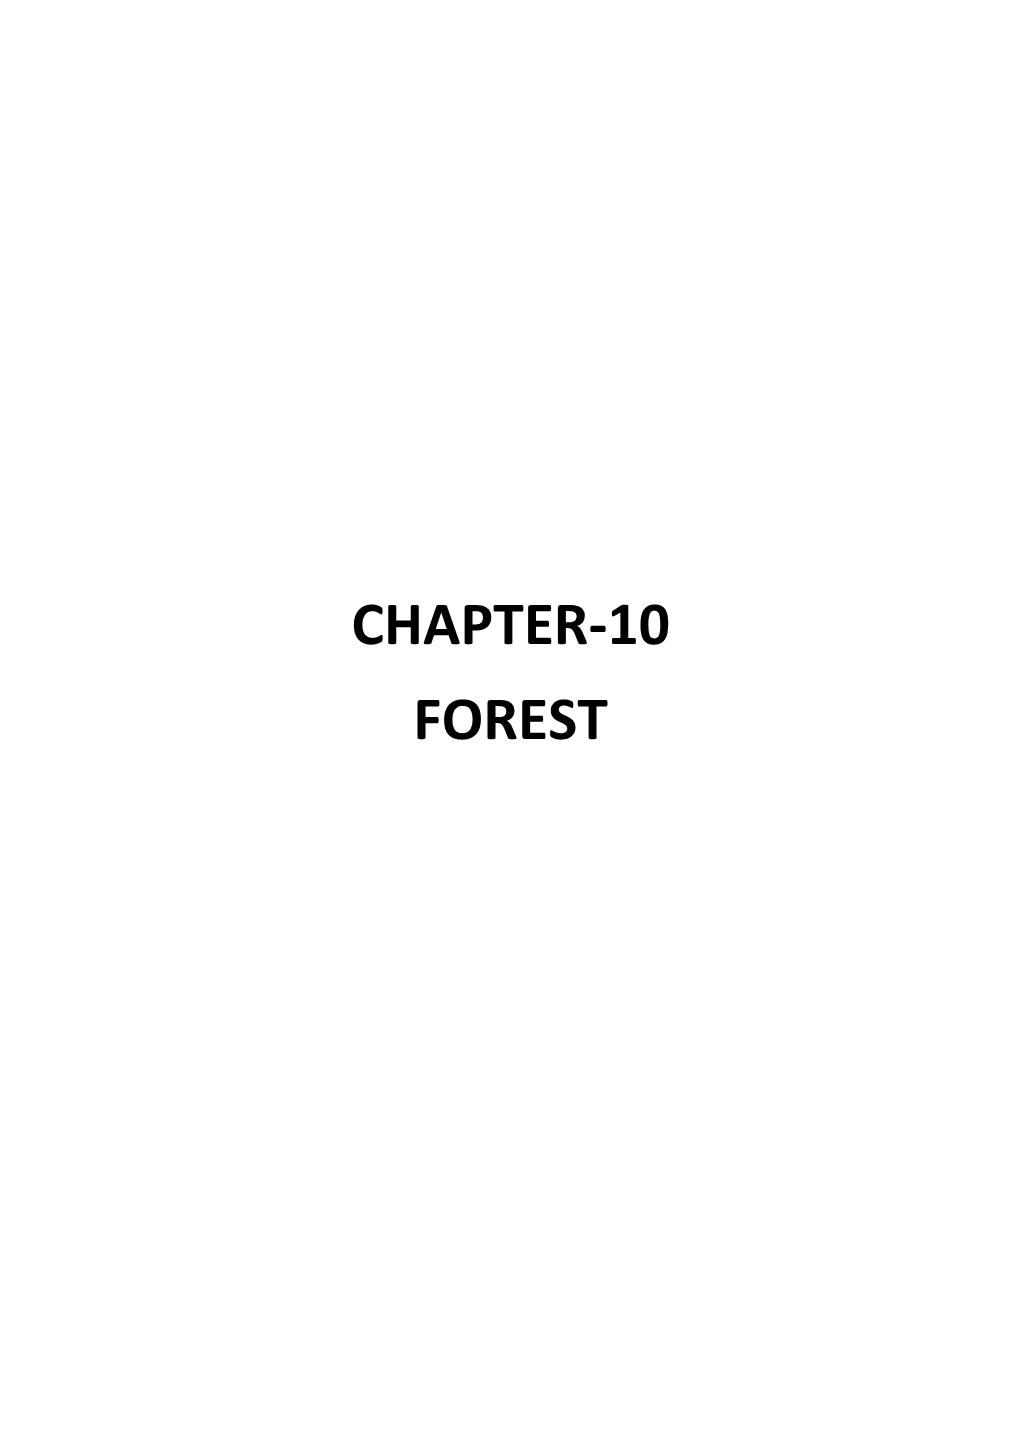 Chapter-10 Forest